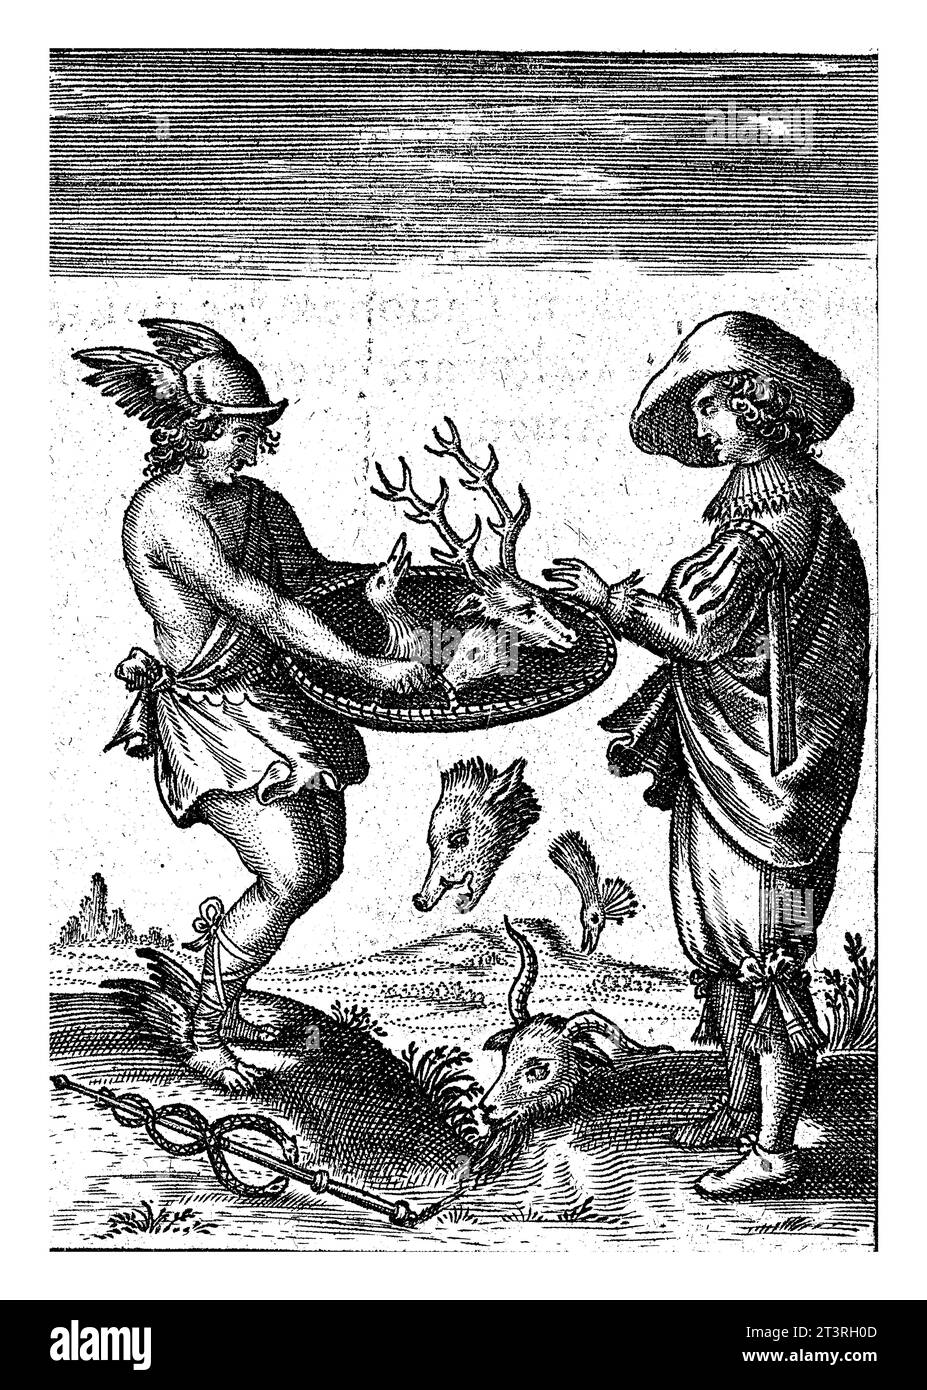 Mercury with a Bowl of Severed Heads of Animals, Martin Baes, c. 1614 - c. 1631 Mercury offers a nobleman a bowl with severed animal heads. Stock Photo